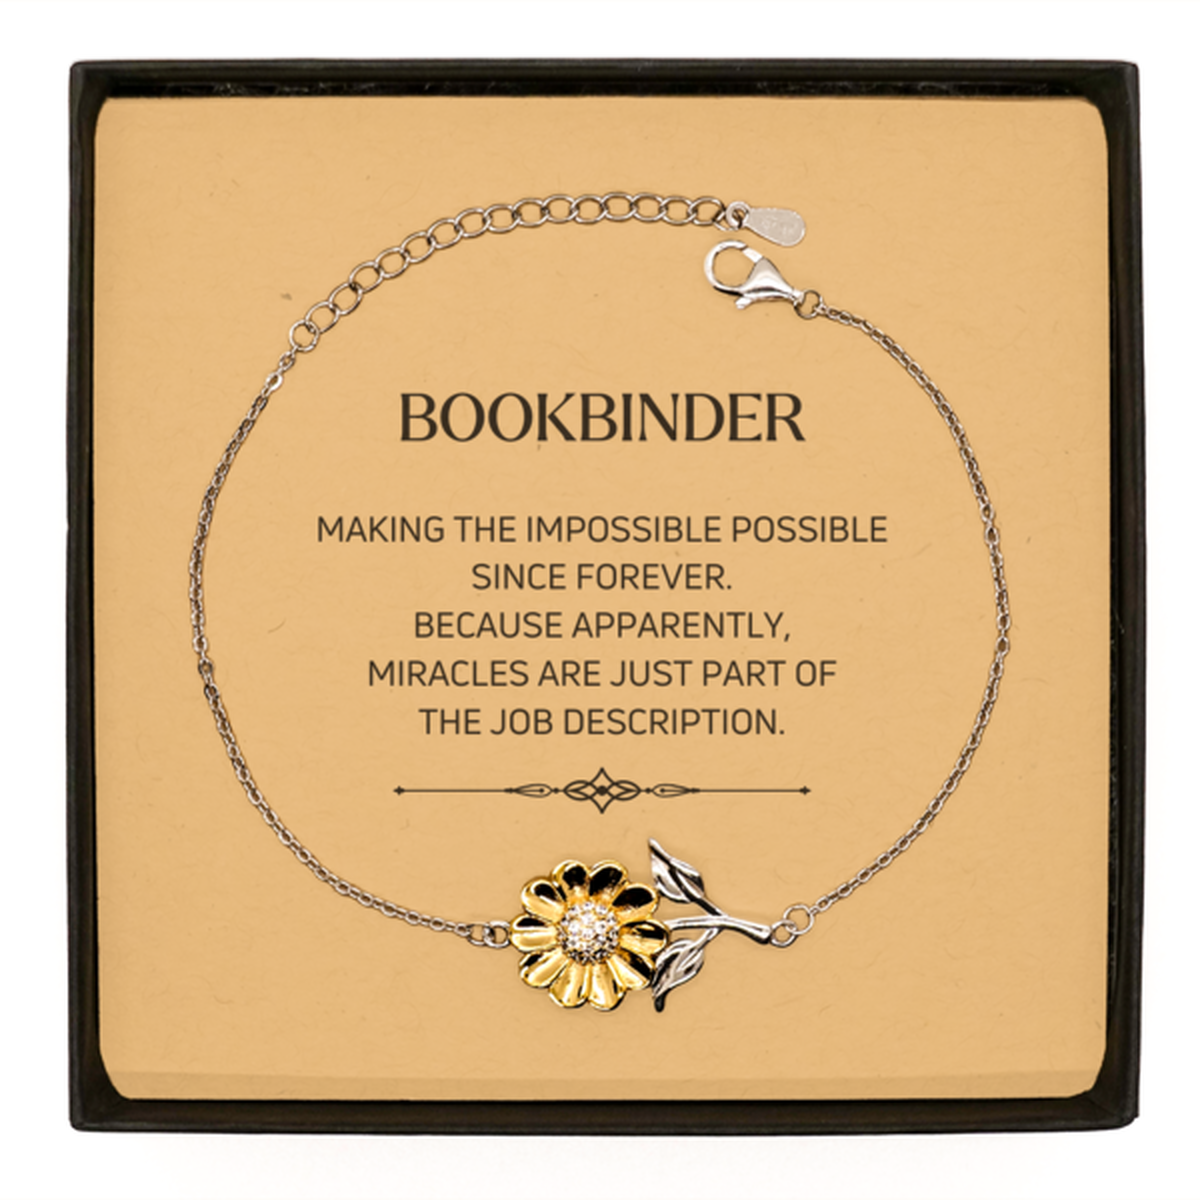 Funny Bookbinder Gifts, Miracles are just part of the job description, Inspirational Birthday Sunflower Bracelet For Bookbinder, Men, Women, Coworkers, Friends, Boss